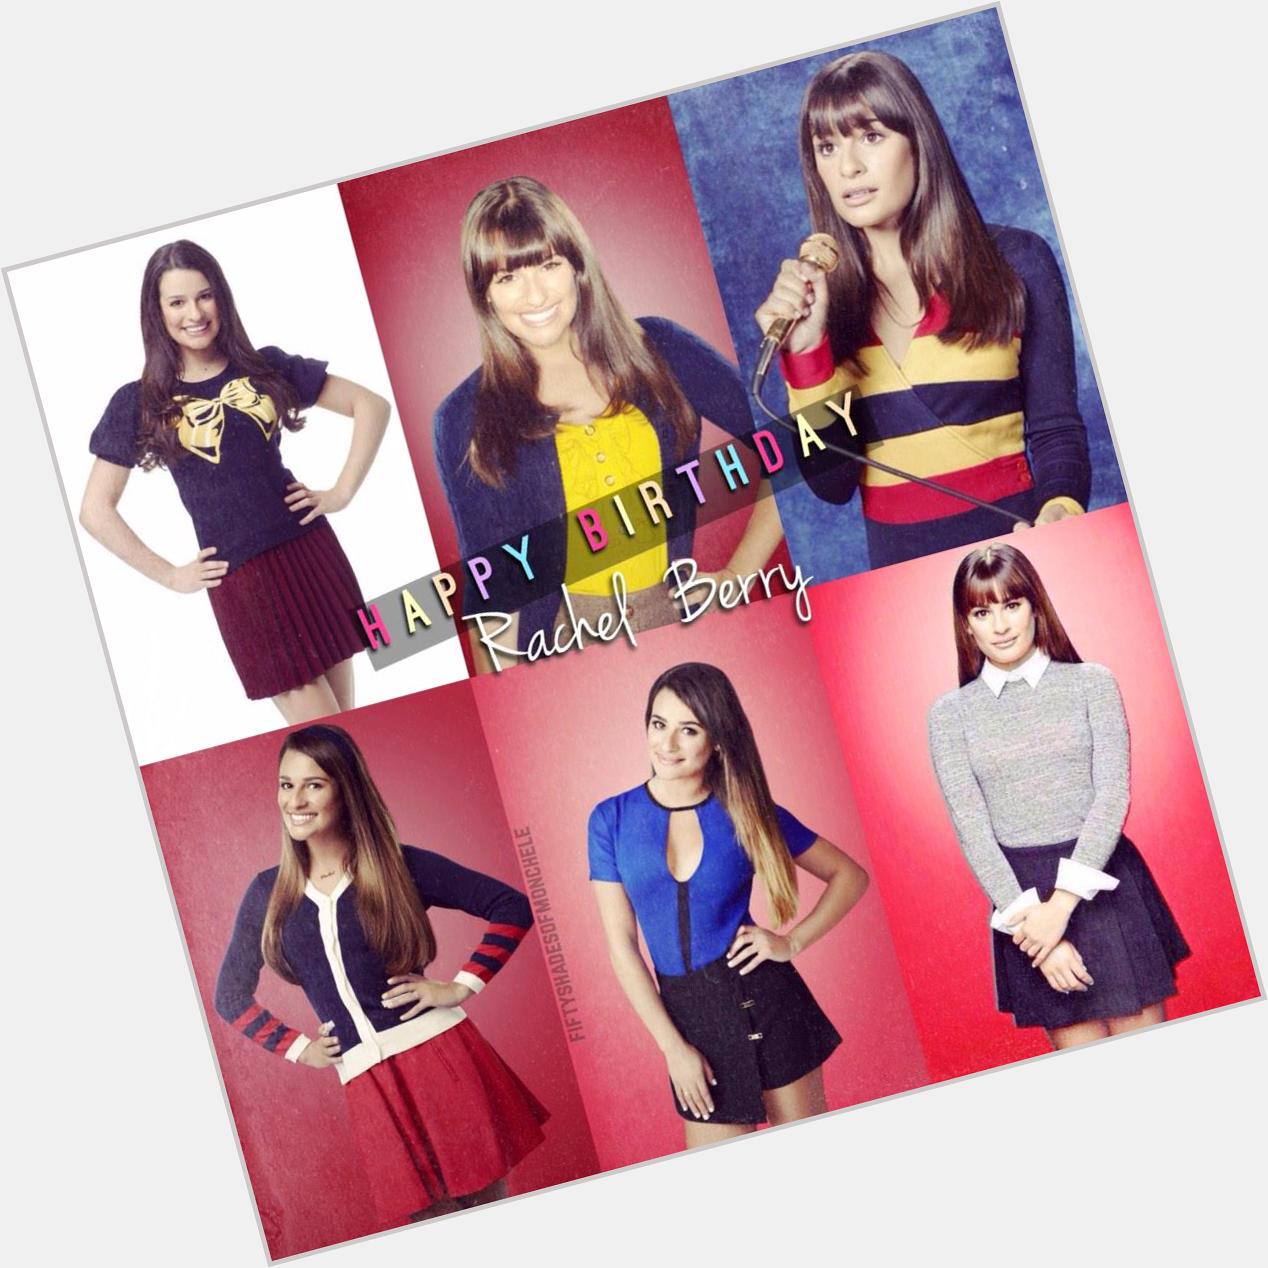 Happy birthday to our gold star, Rachel Berry.   